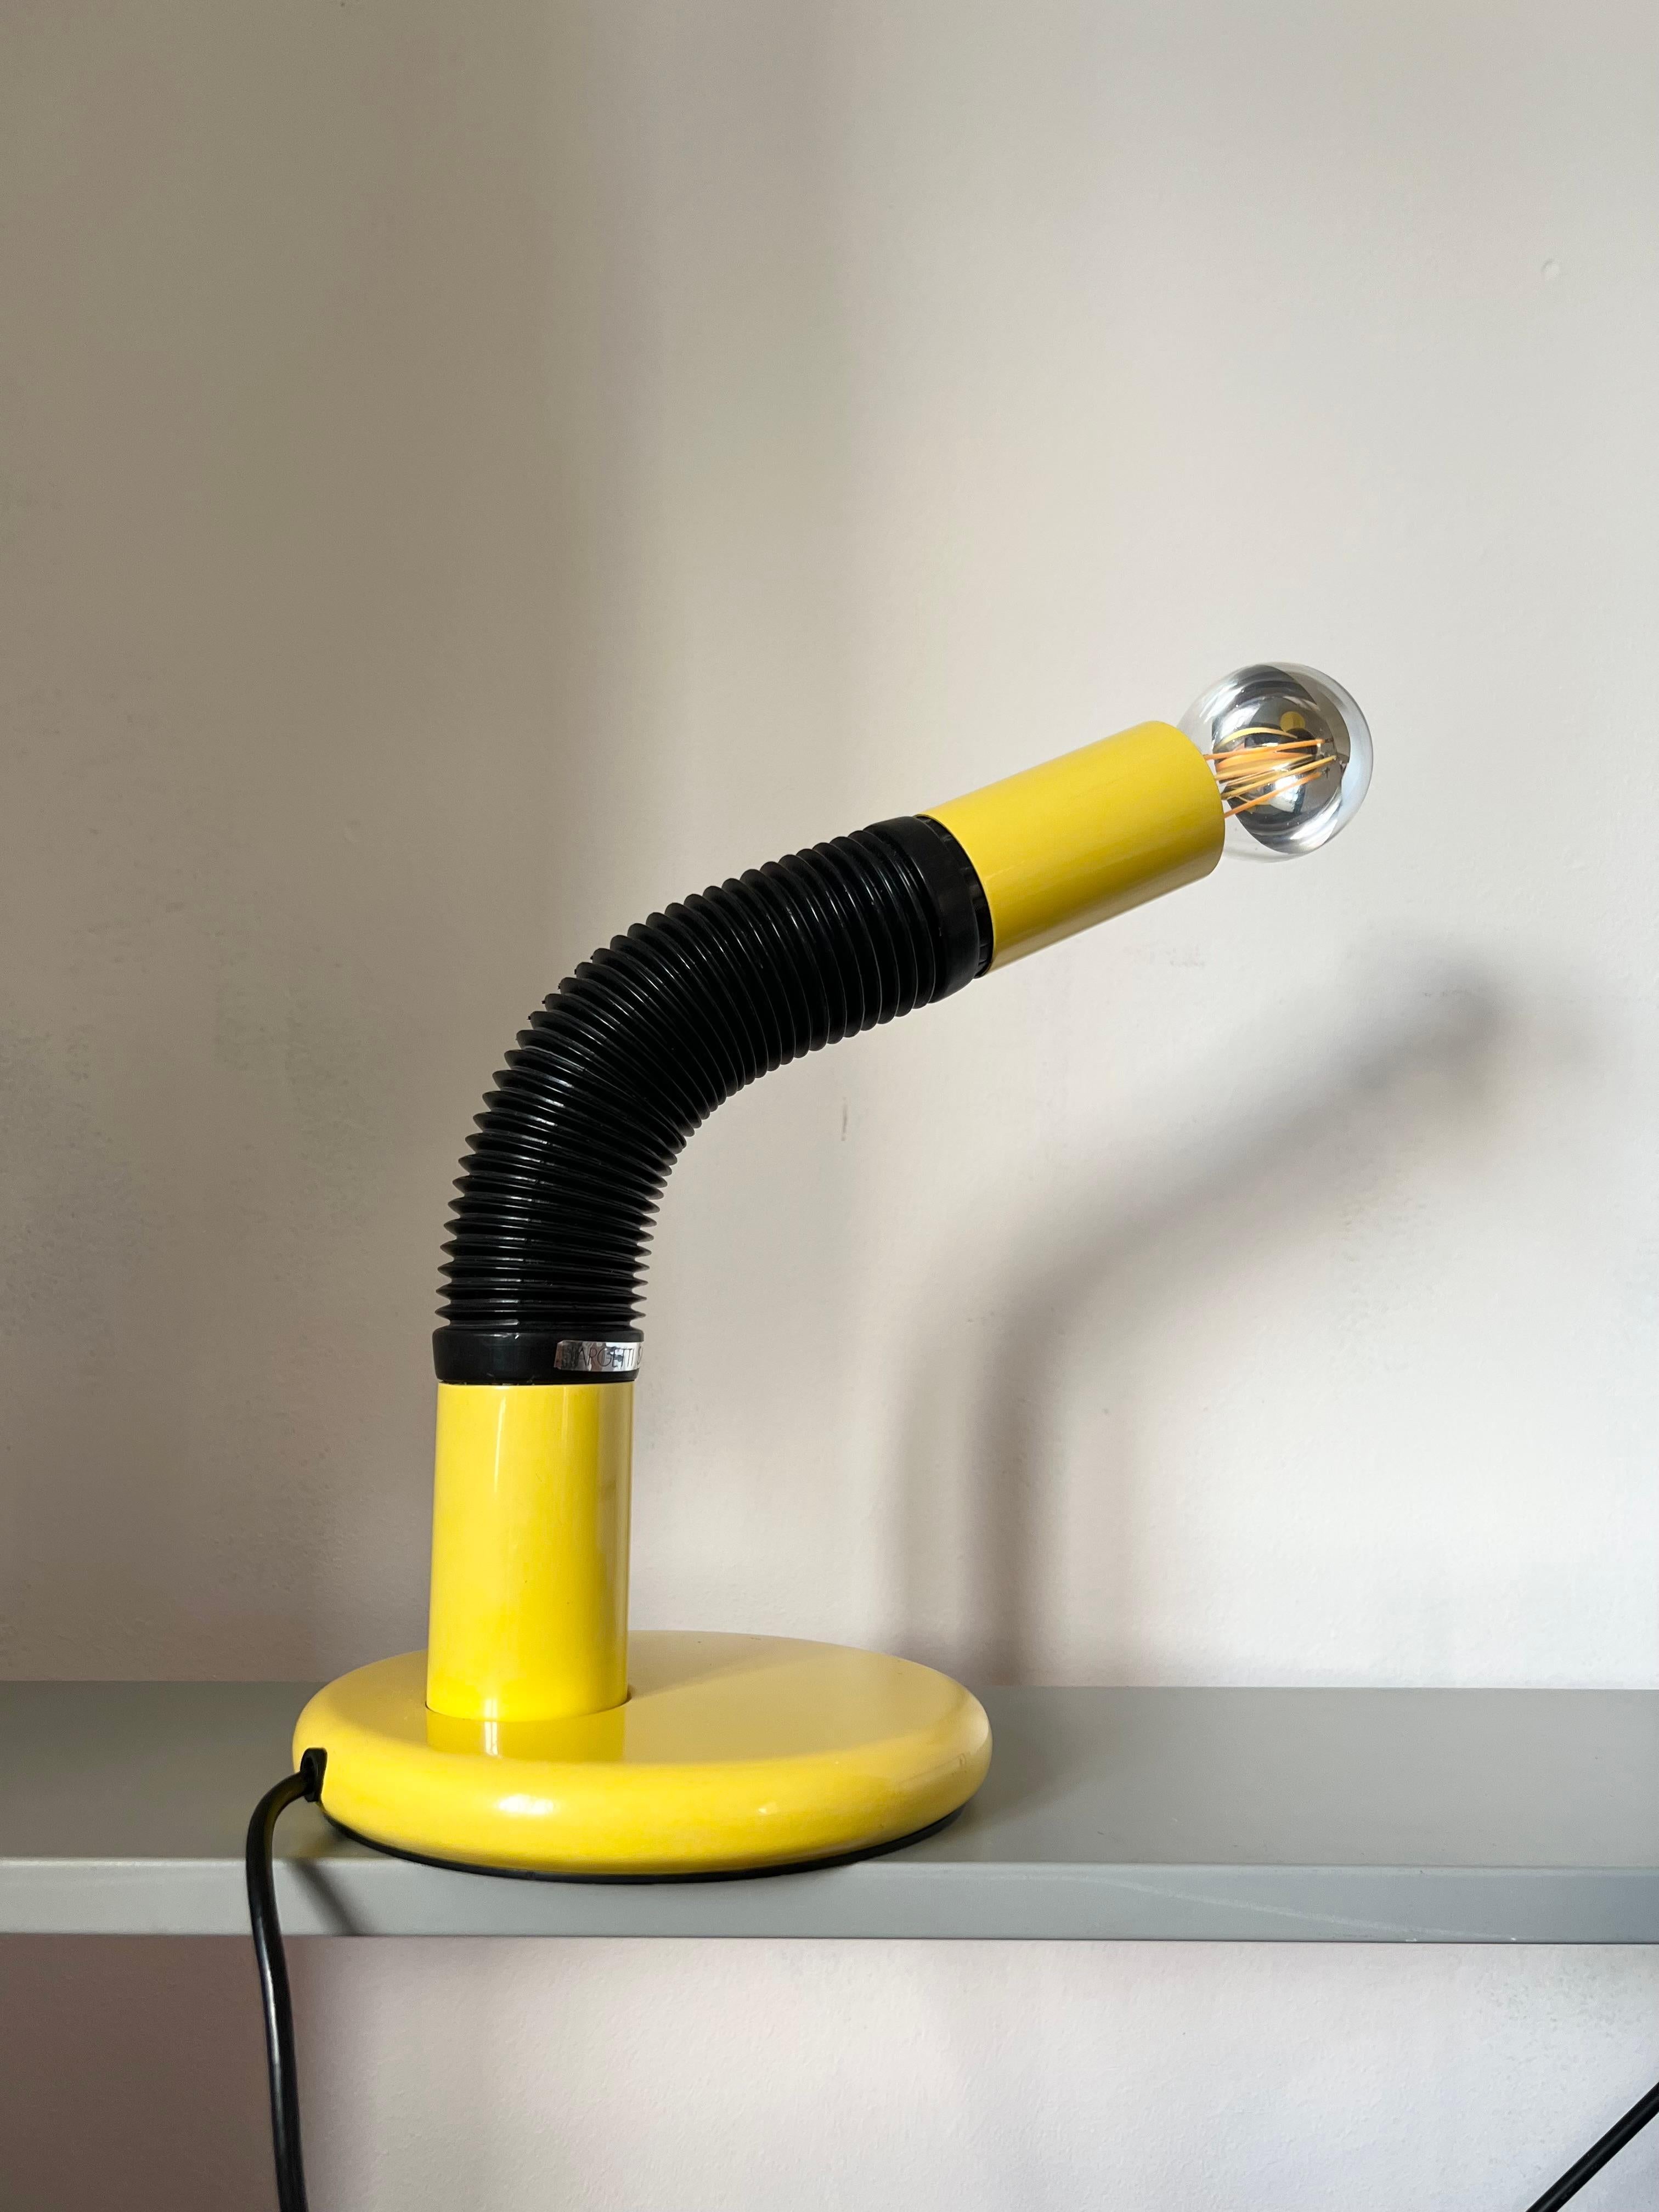 Space age tubular 'Elbow' desk lamp by E.Bellini for Targetti Sankey, produced in Italy in the 70's.

Yellow lacquered circular base with 2 yellow lacquered tubes with plastic flexible tube in-between.

Good vintage condition, a couple of minor